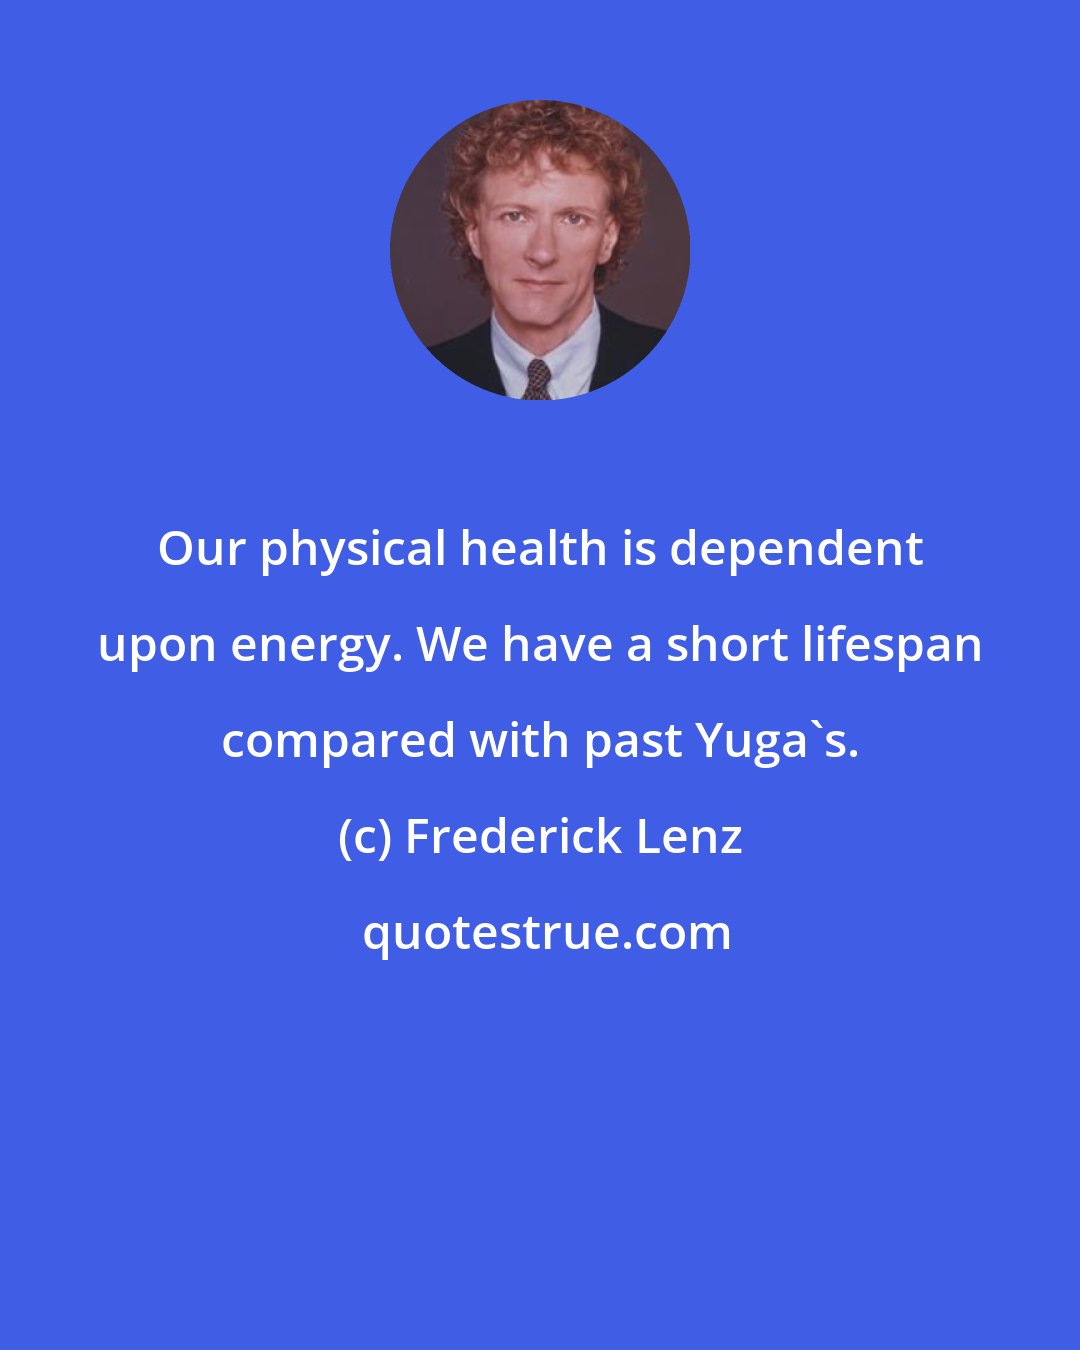 Frederick Lenz: Our physical health is dependent upon energy. We have a short lifespan compared with past Yuga's.